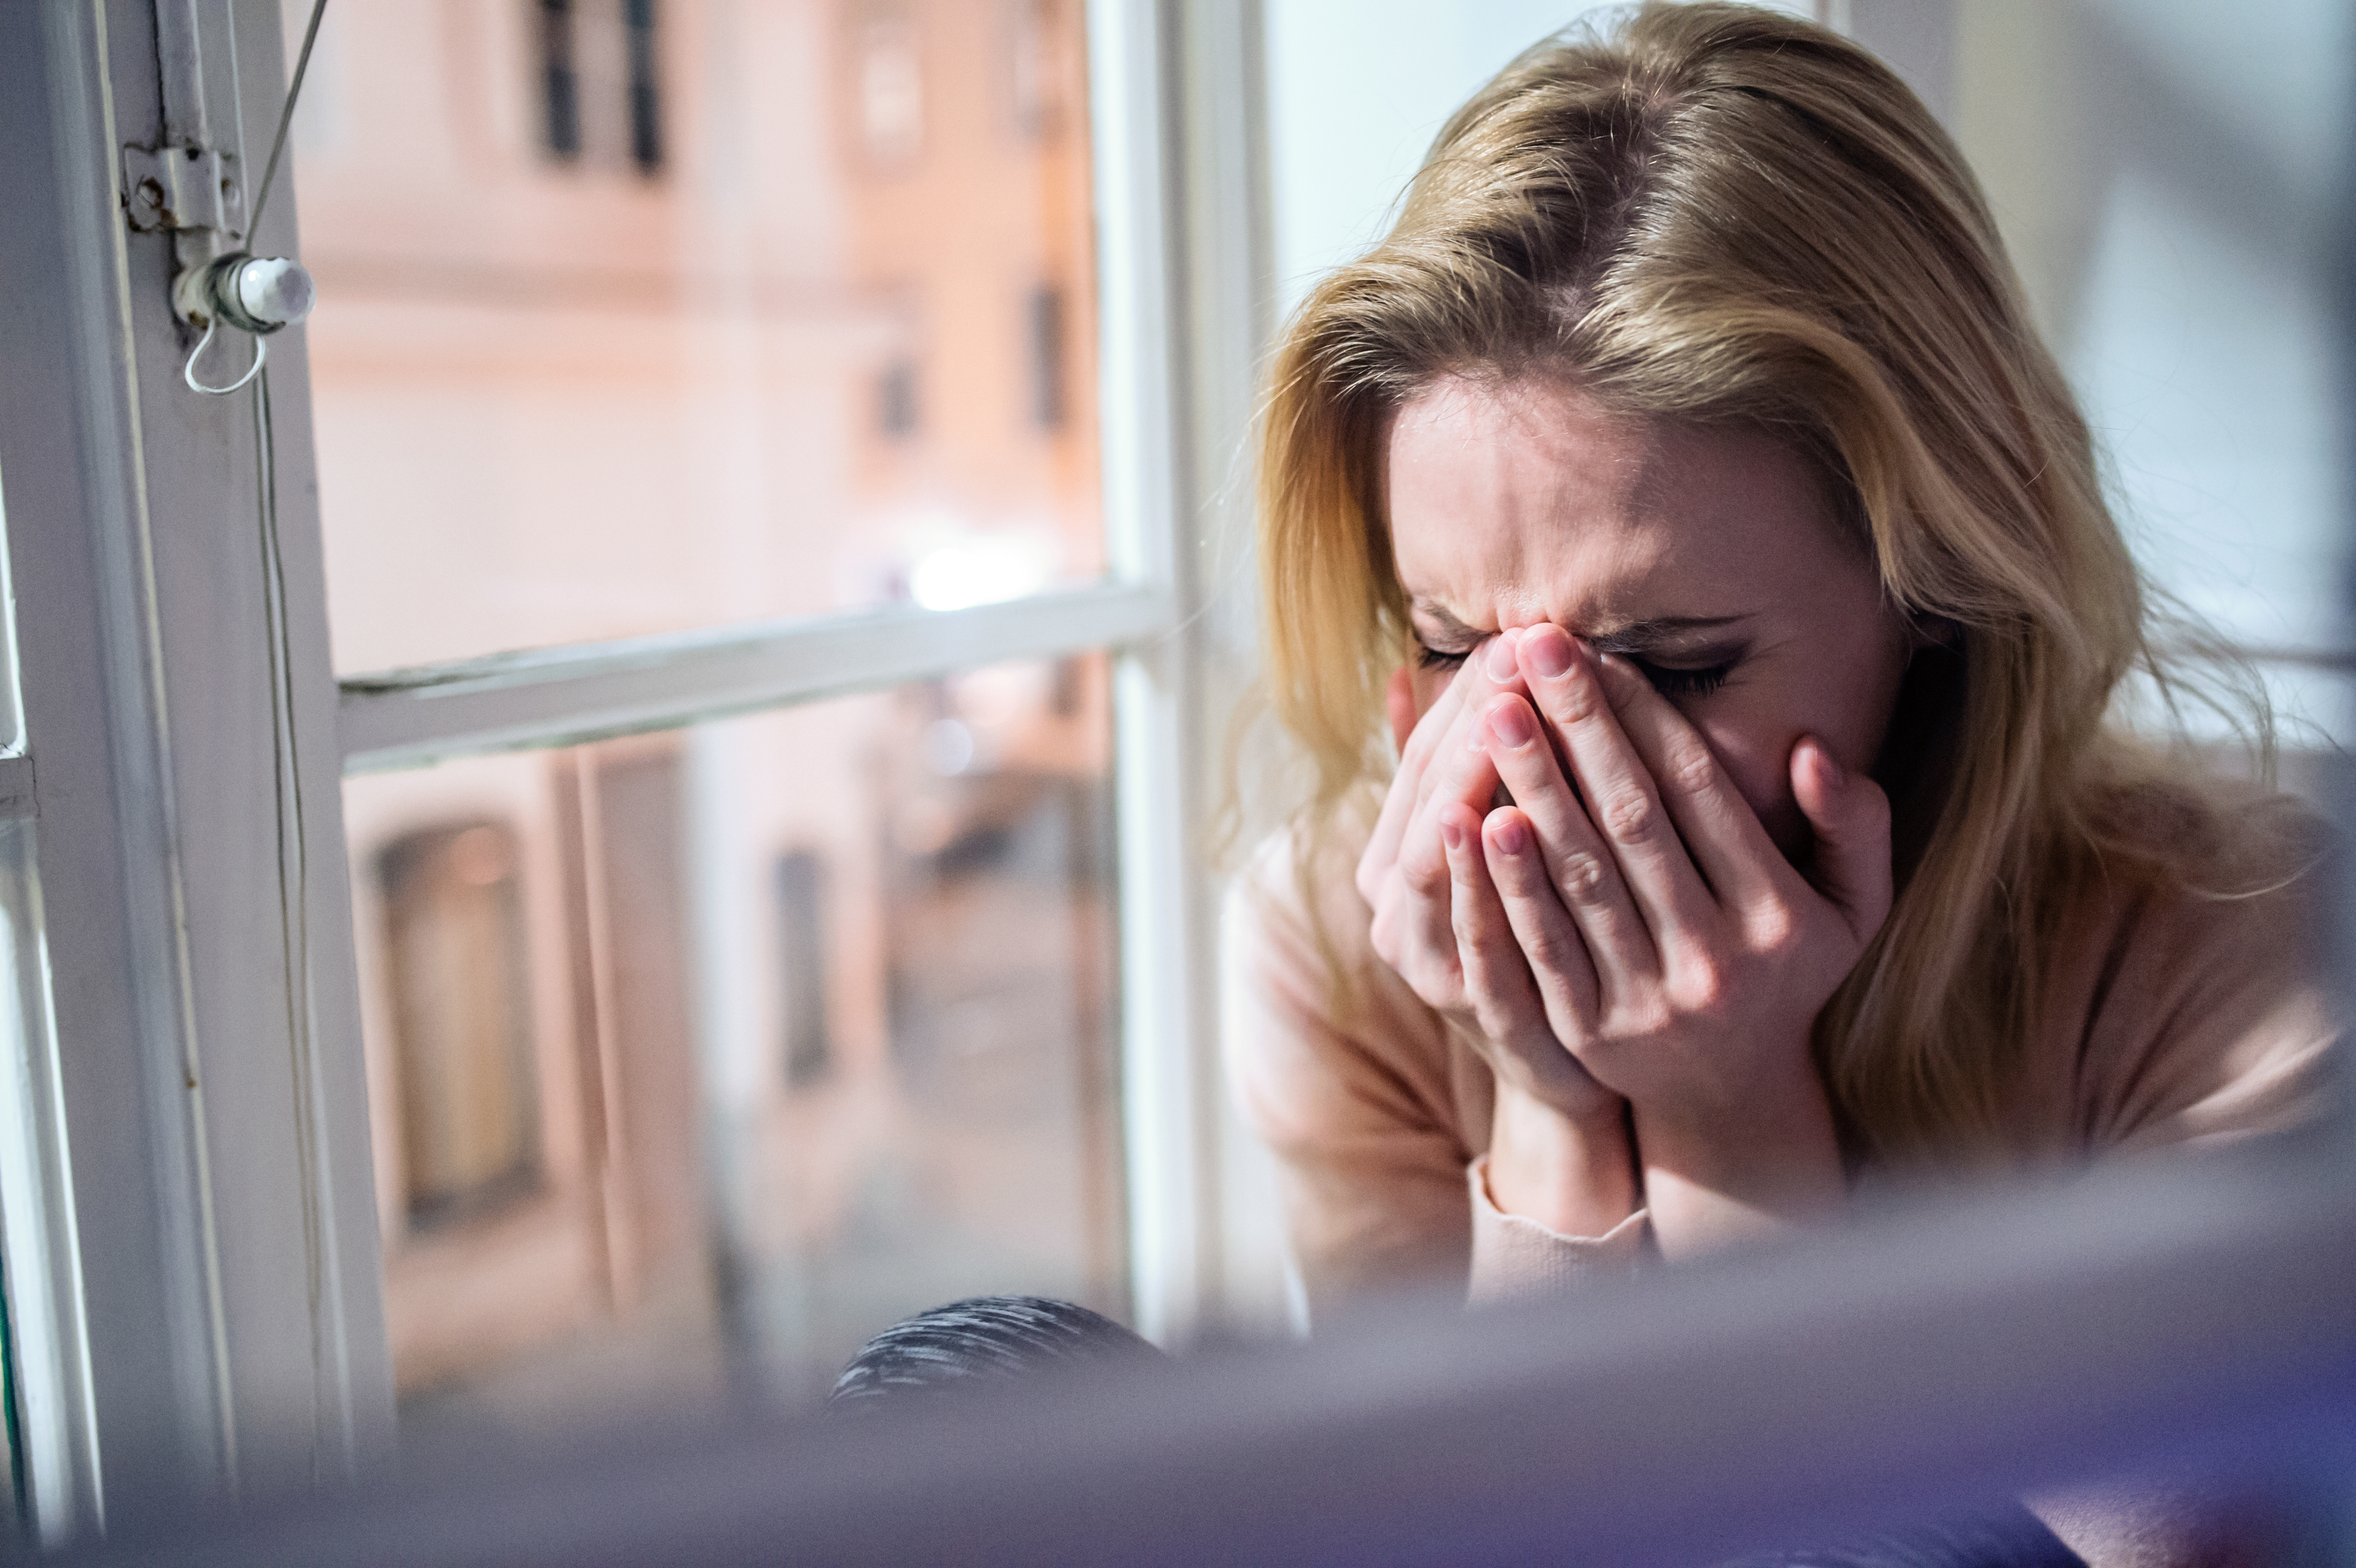 A woman crying while sitting next to the window | Source: Shutterstock